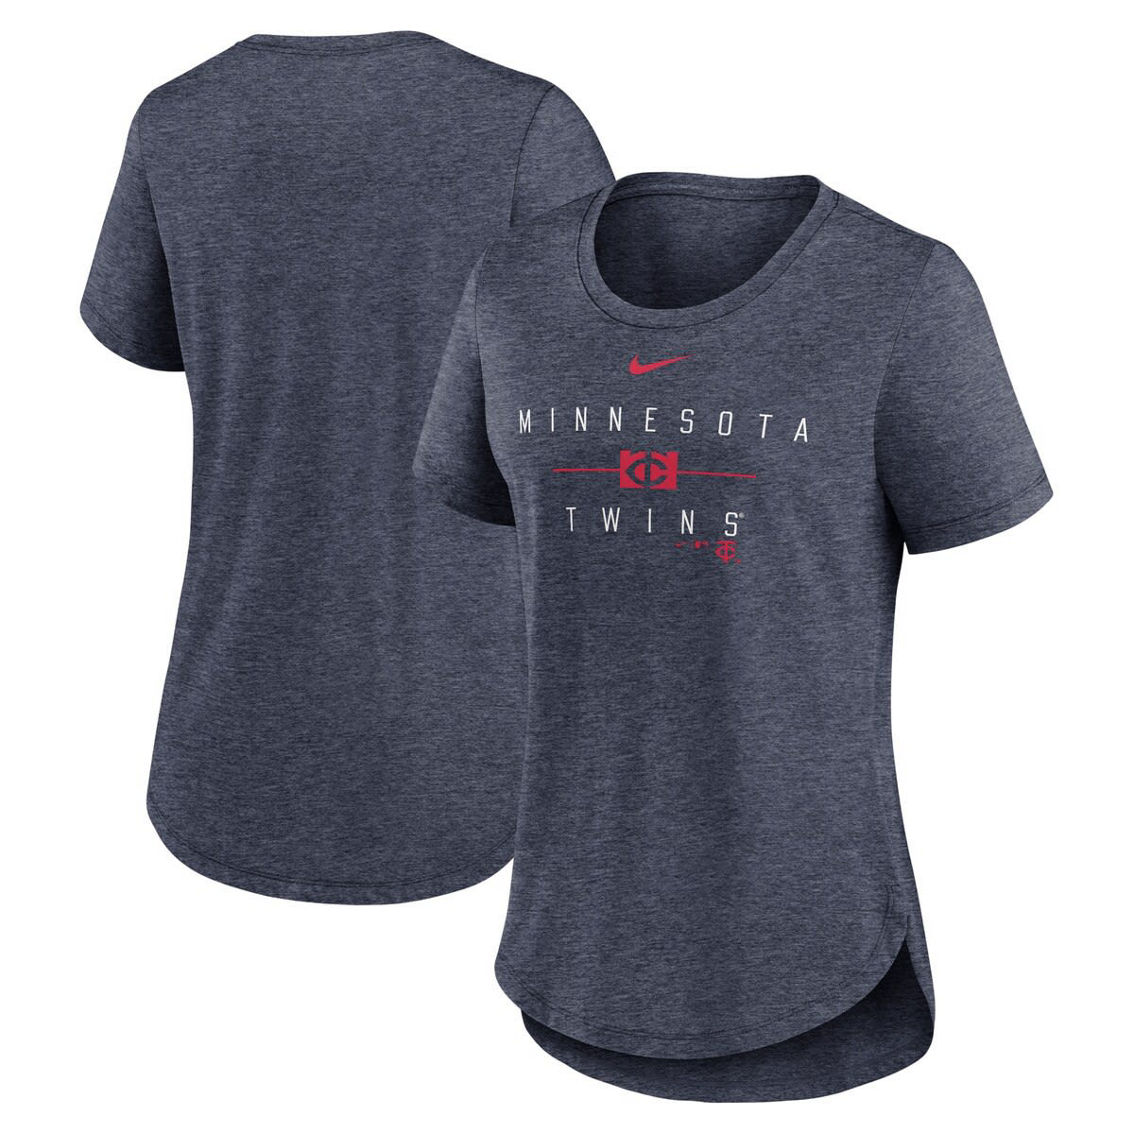 Nike Women's Heather Navy Minnesota Twins Knockout Team Stack Tri-Blend T-Shirt - Image 2 of 4